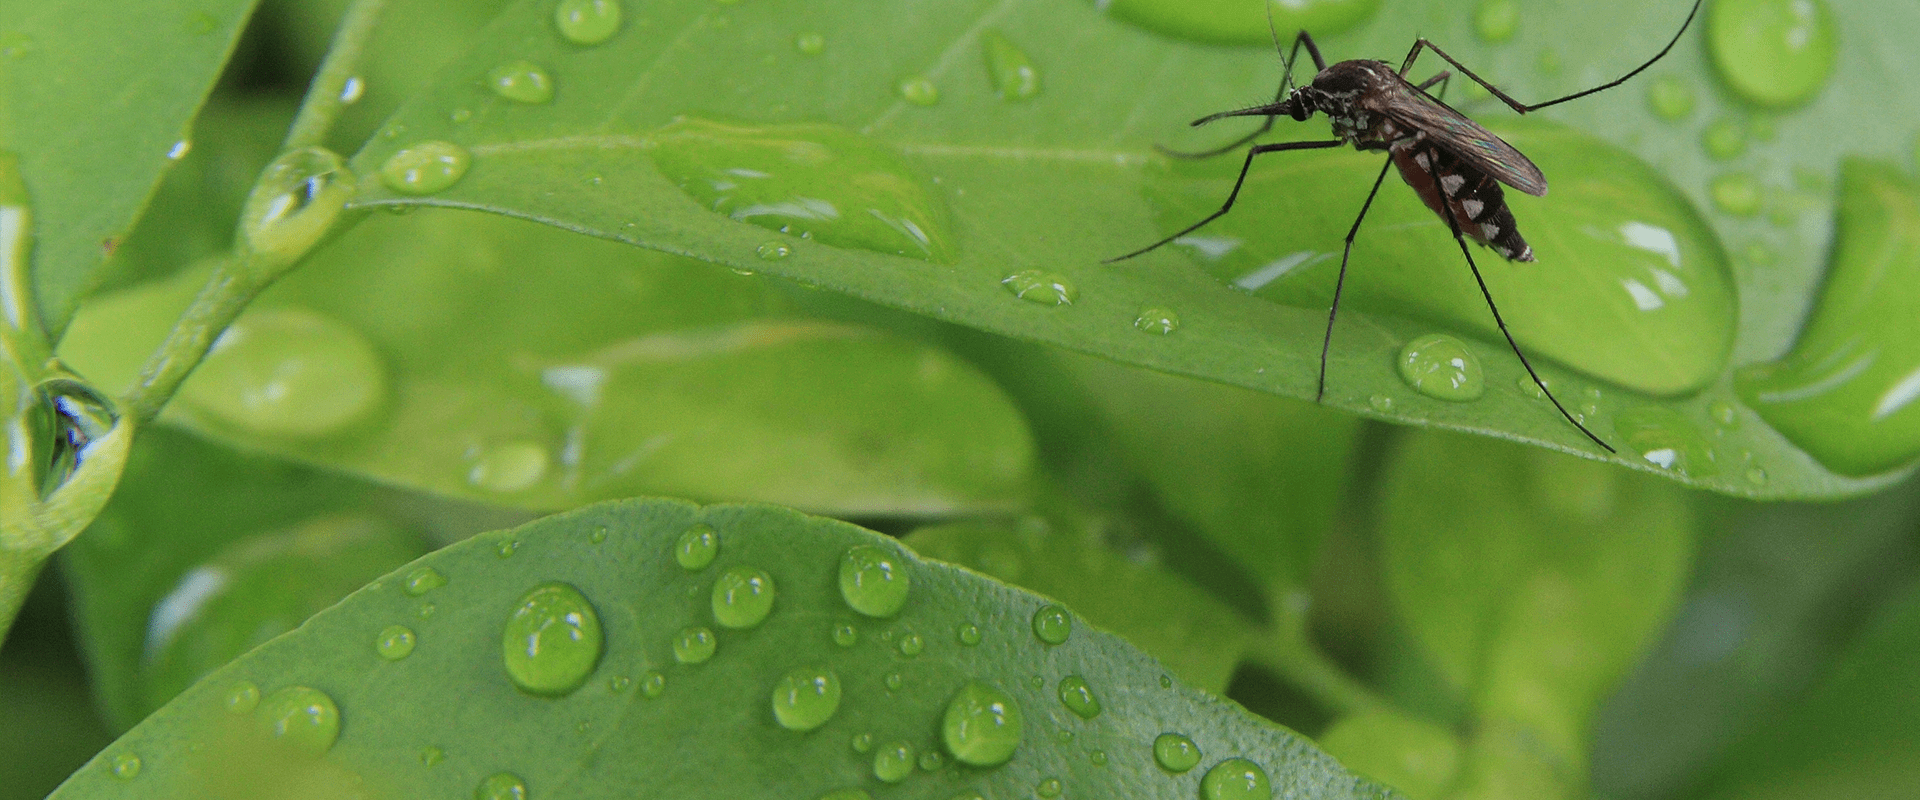 mosquito on a leaf outside baltimore business